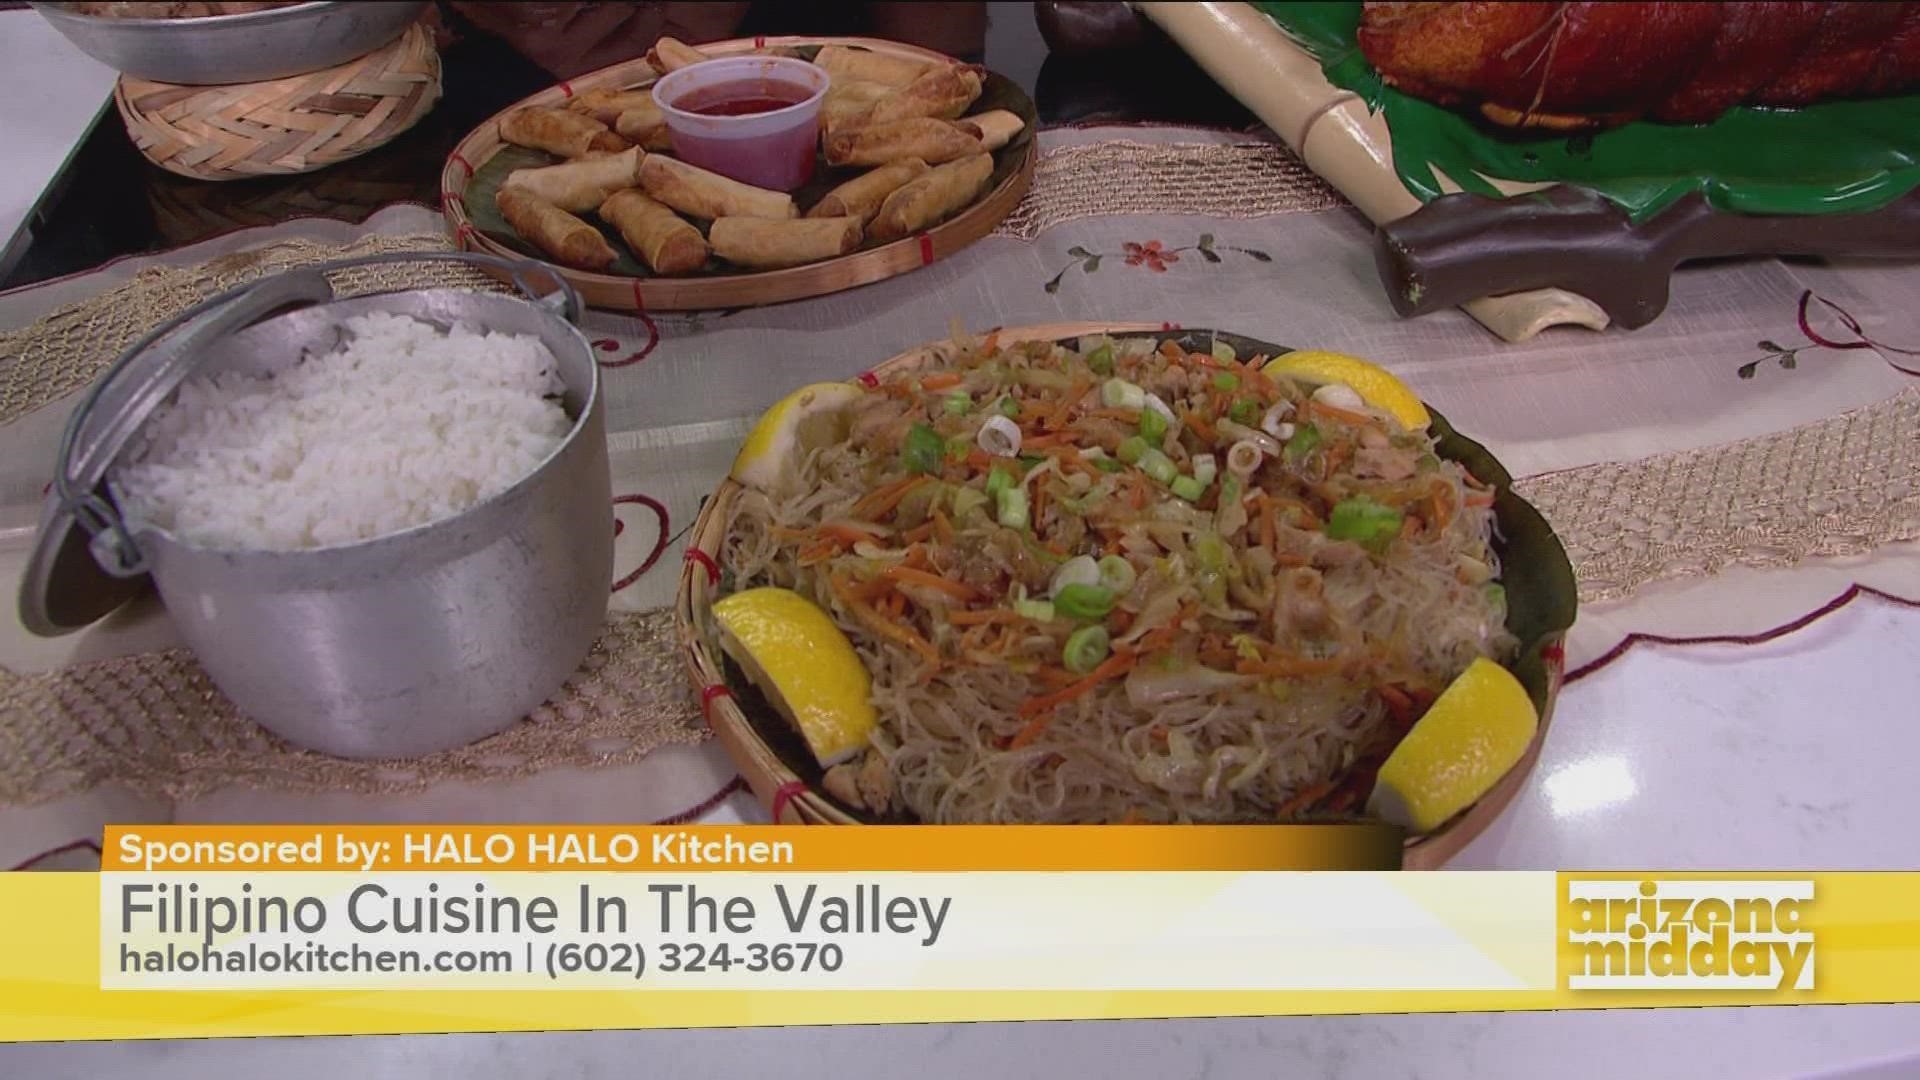 Leonard, with HALO HALO Kitchen, shows us some of the top Filipino dishes to try & how the star of Easter Sunday, Jo Koy, stopped by the restaurant